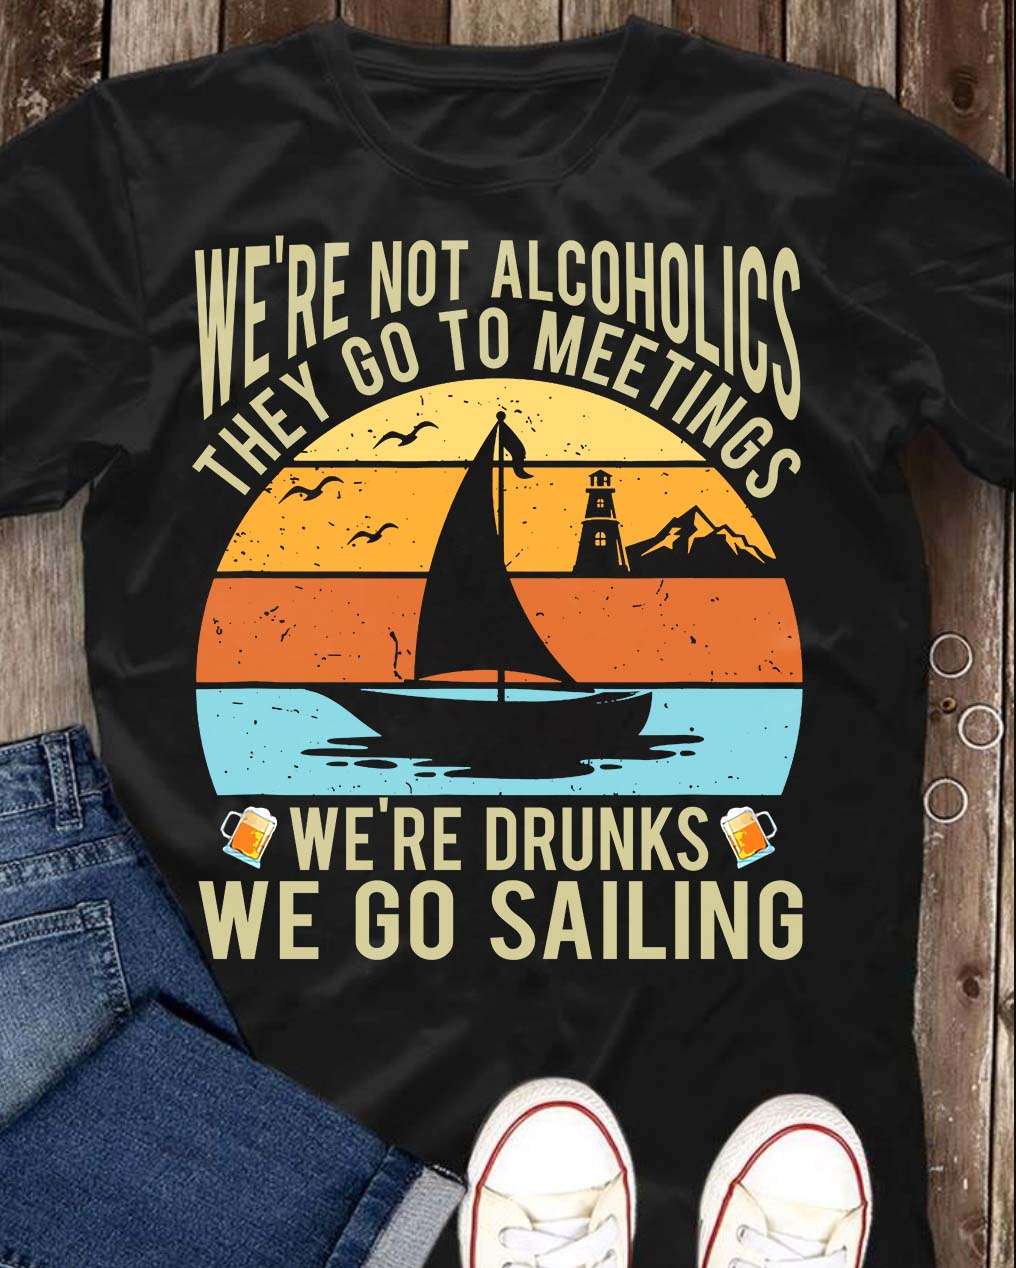 We're not alcoholics they go to meetings - we're drunks we go sailing ...